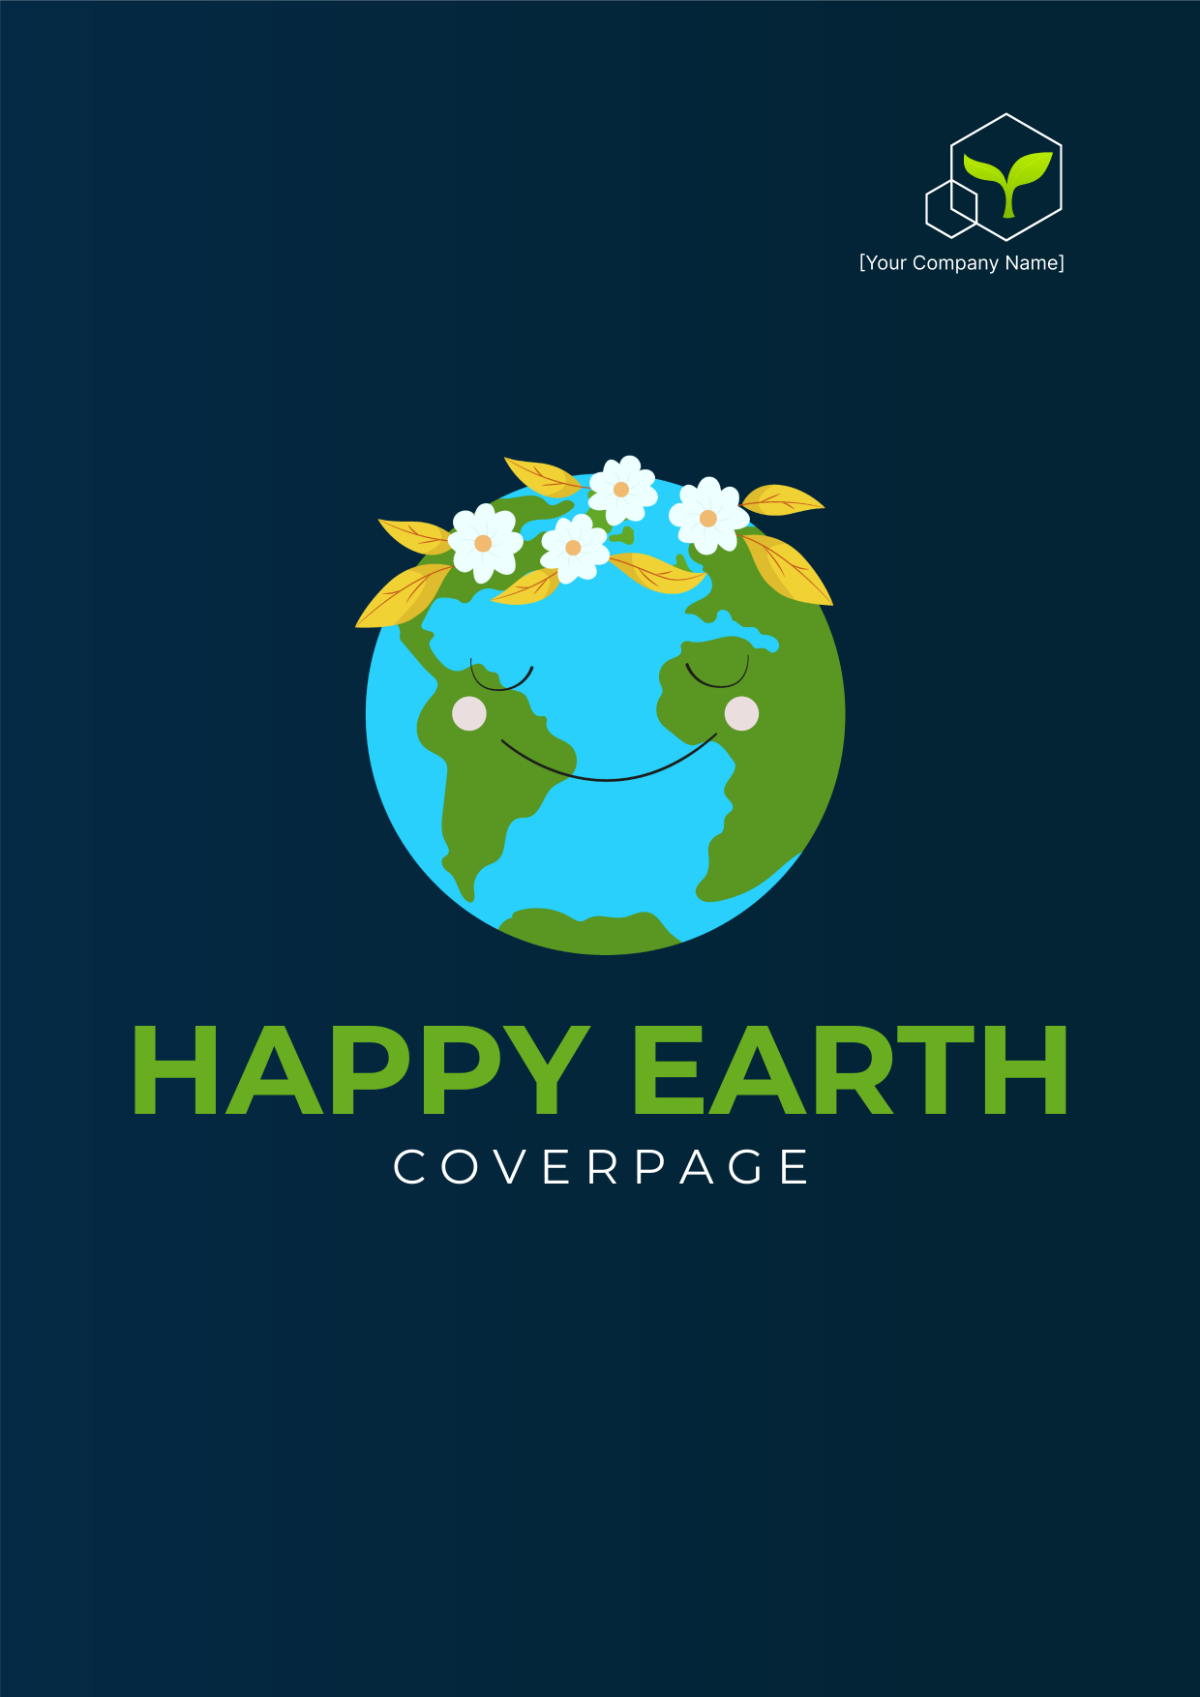 Happy Earth Day Cover Page